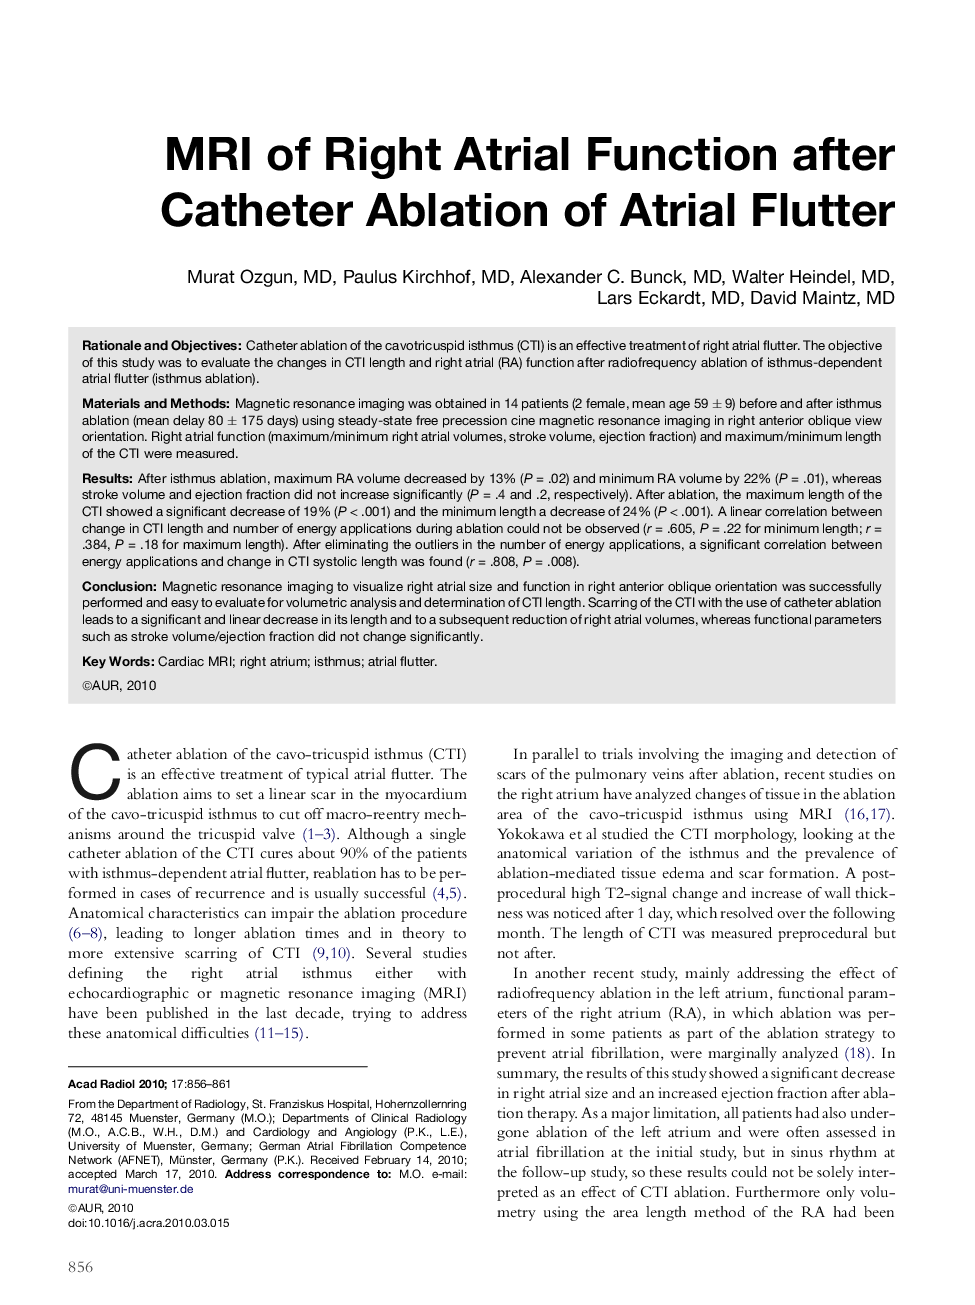 MRI of Right Atrial Function after Catheter Ablation of Atrial Flutter